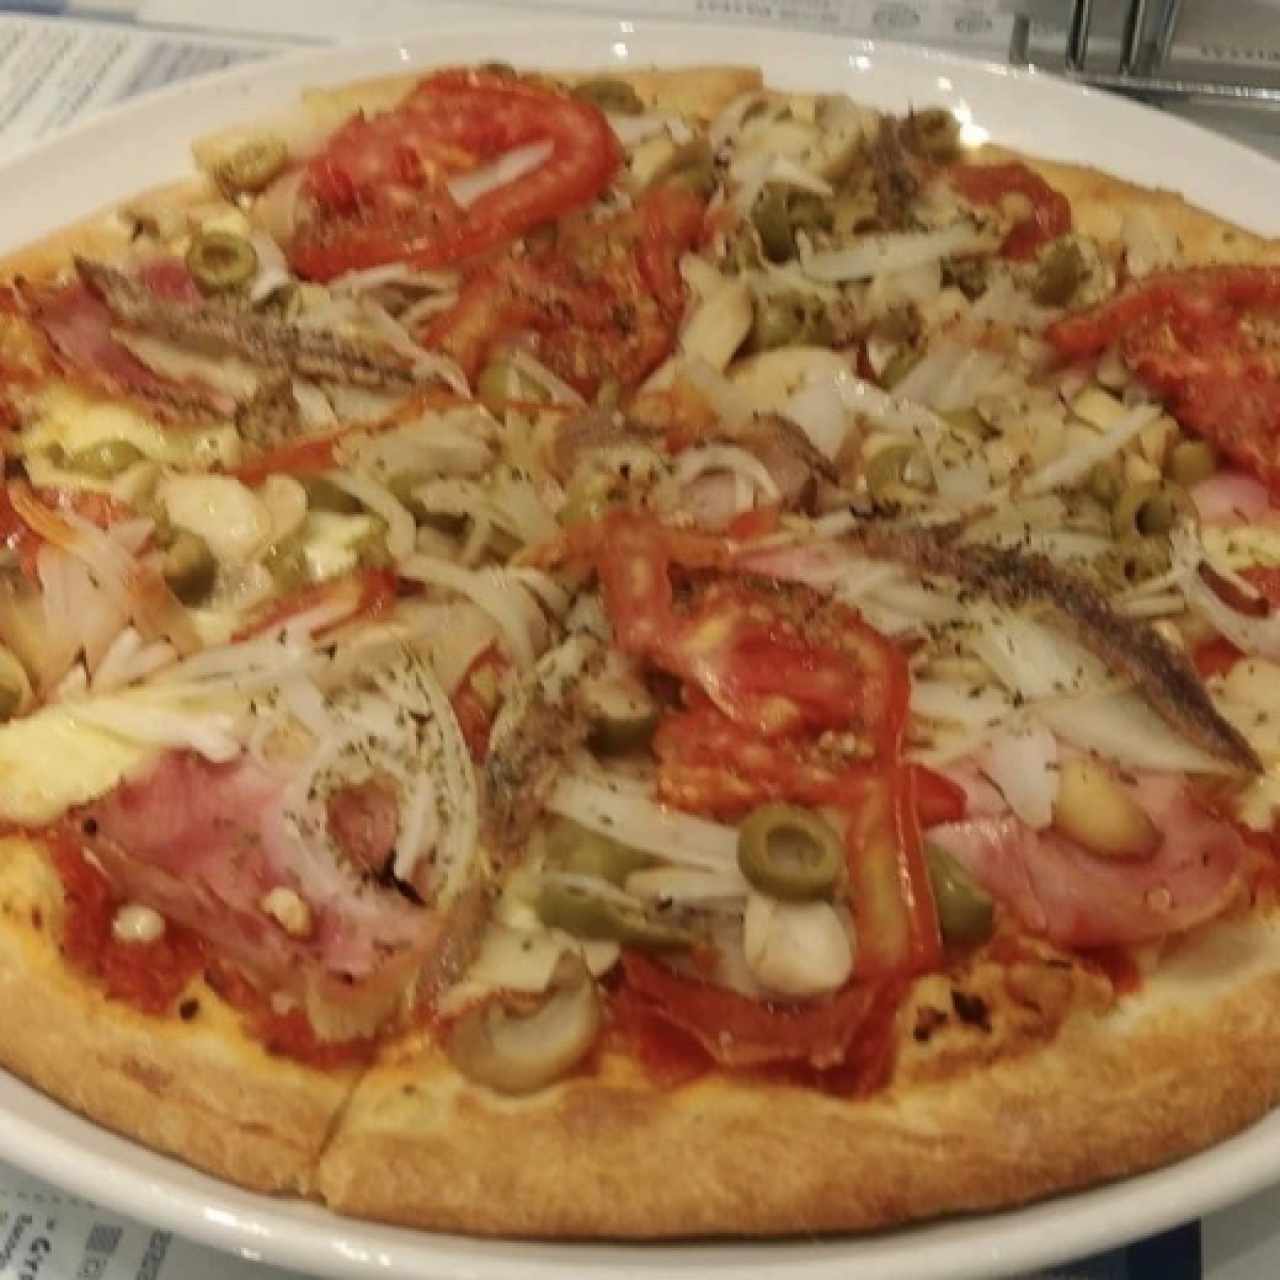 Athens pizza